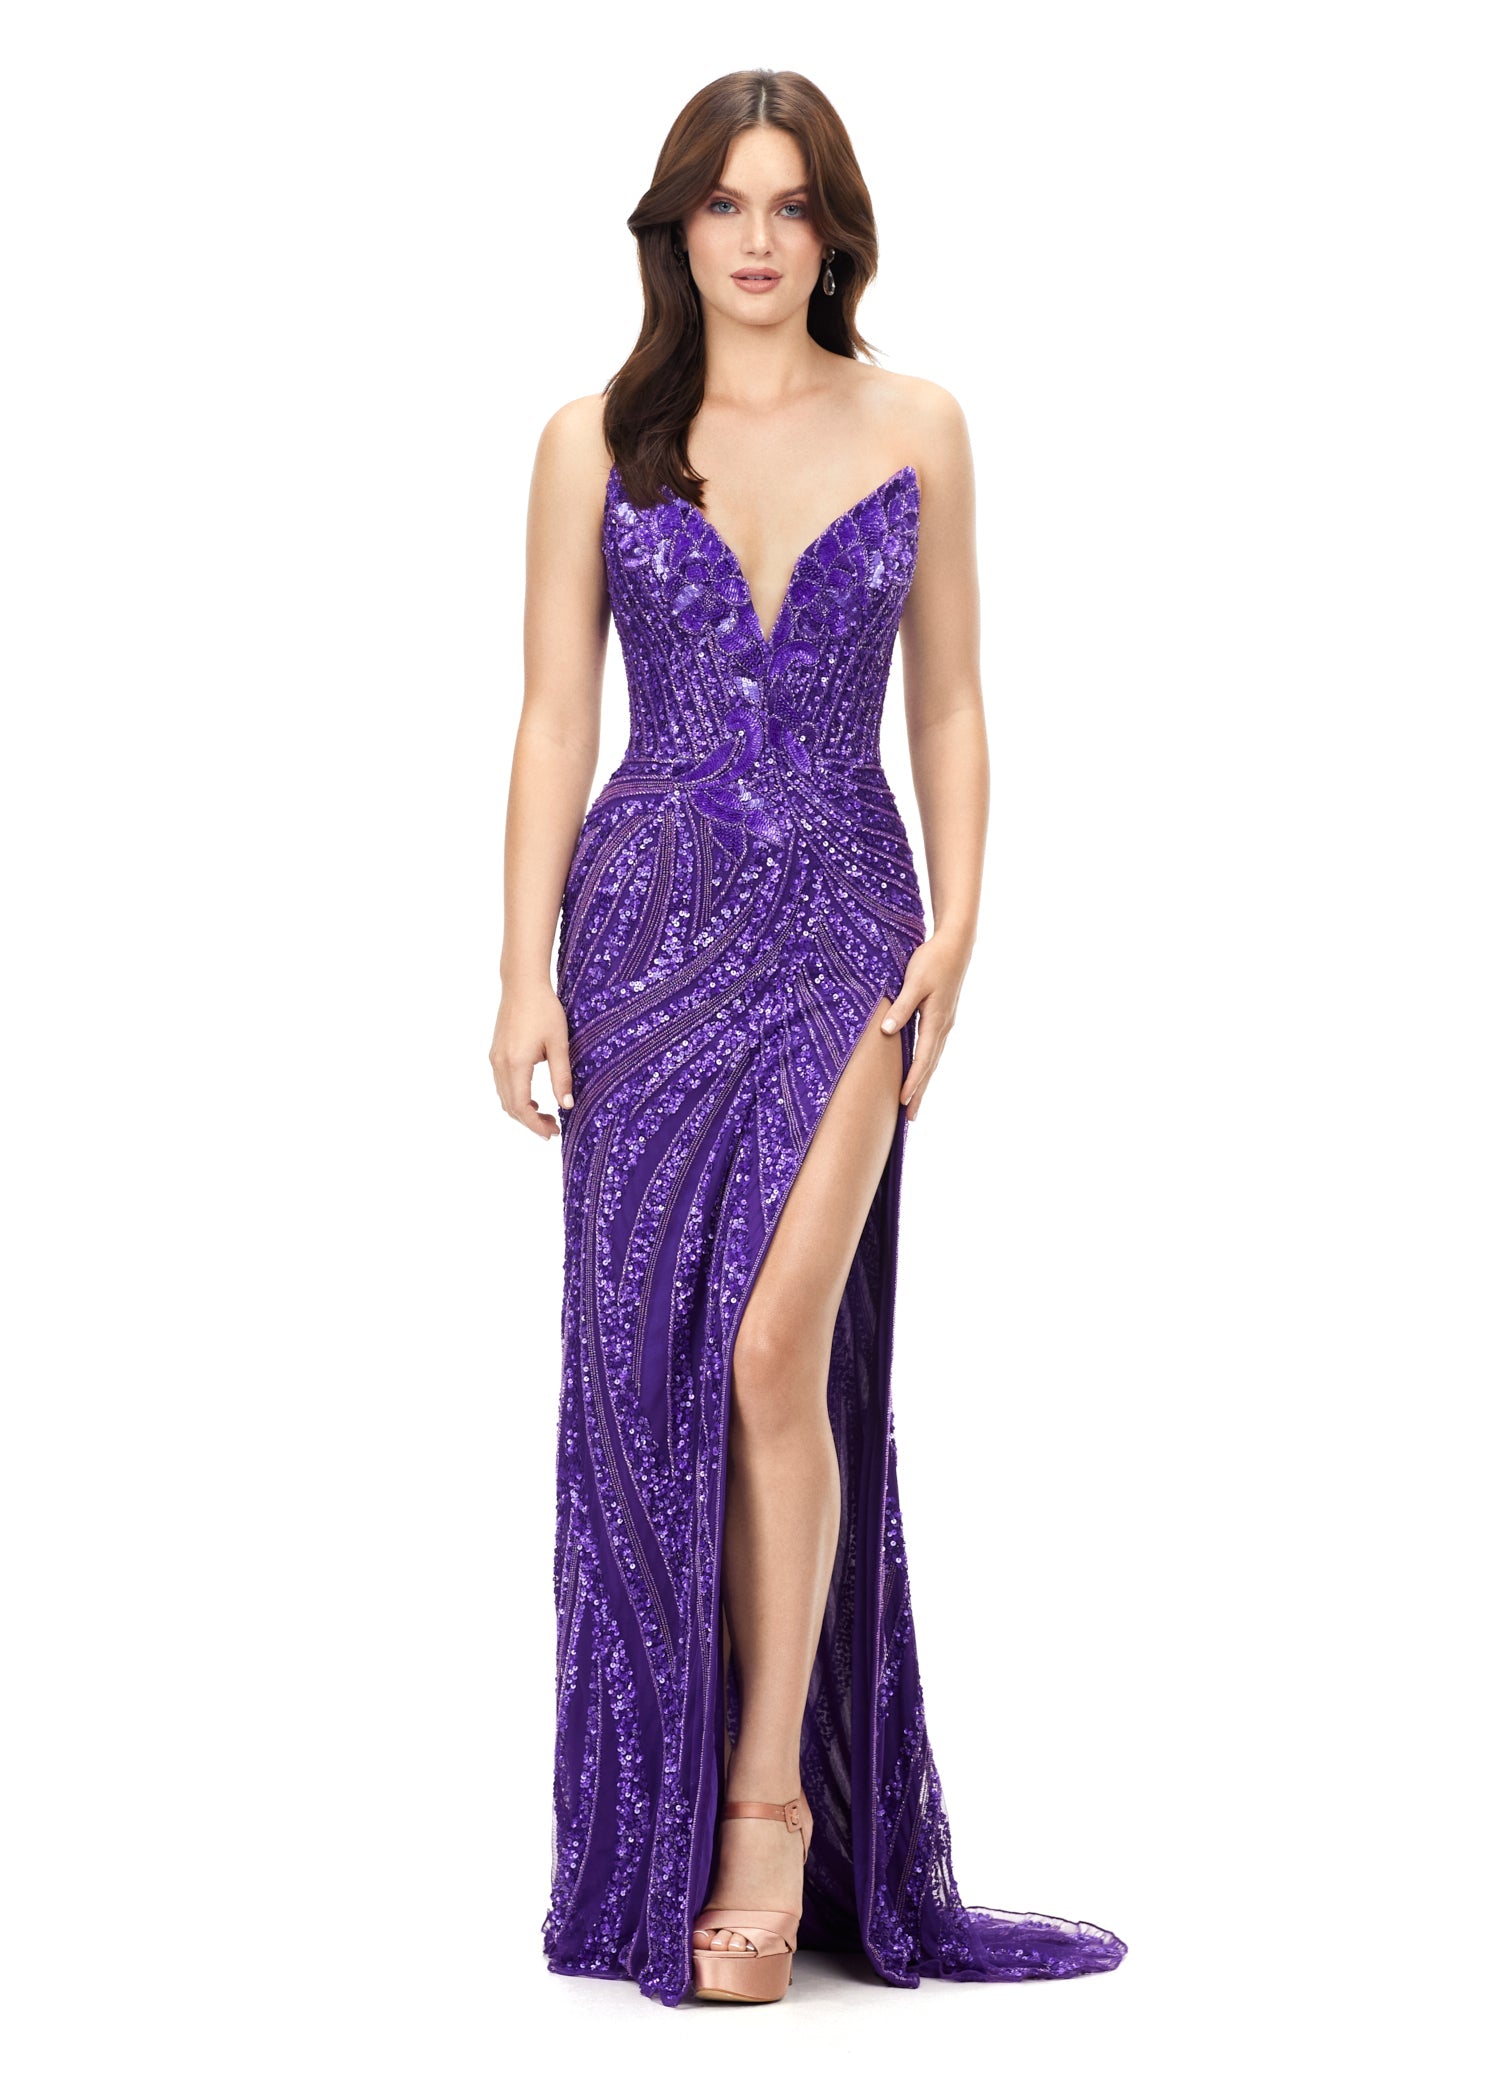 Ashley Lauren 11236 Long Fitted V Neck Slit Beaded Sequin Prom Dress Pageant Gown This strapless gown is sure to turn heads. The sweetheart neckline is complete with a modern floral sequin motif that continues down the bustier and skirt. The skirt is complete with a left leg slit. Strapless Bustier Left Leg Slit Fully Hand Beaded COLORS: Gold, Rose Gold, Gold/Black, Sky/Nude, Gold/Ivory, Fuchsia/Black, Purple, Red, Fuchsia, Bright Pink, Blue/Jade Sizes: 0-16